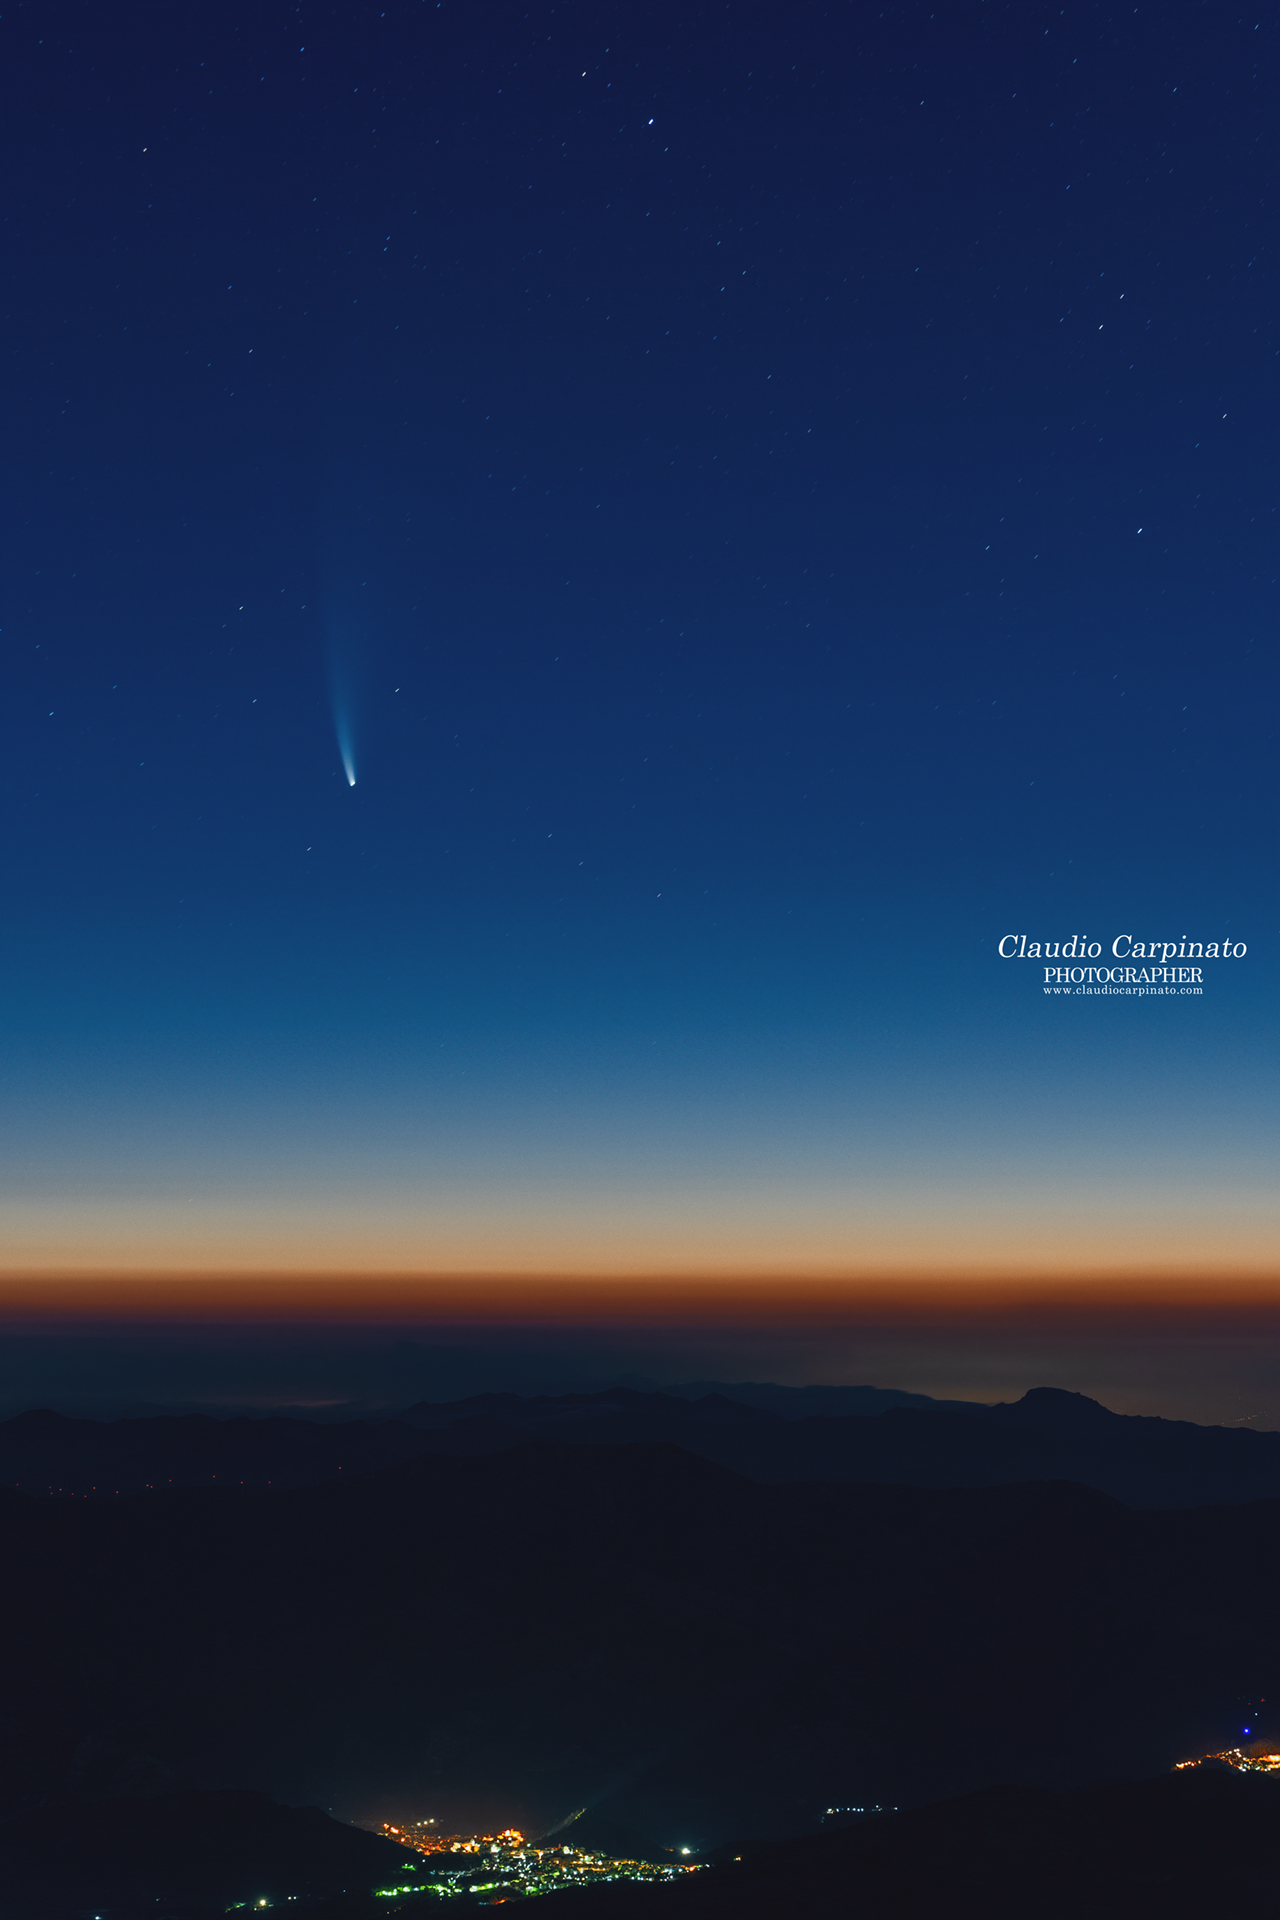 Comet "c/2020 F3 Neowise"